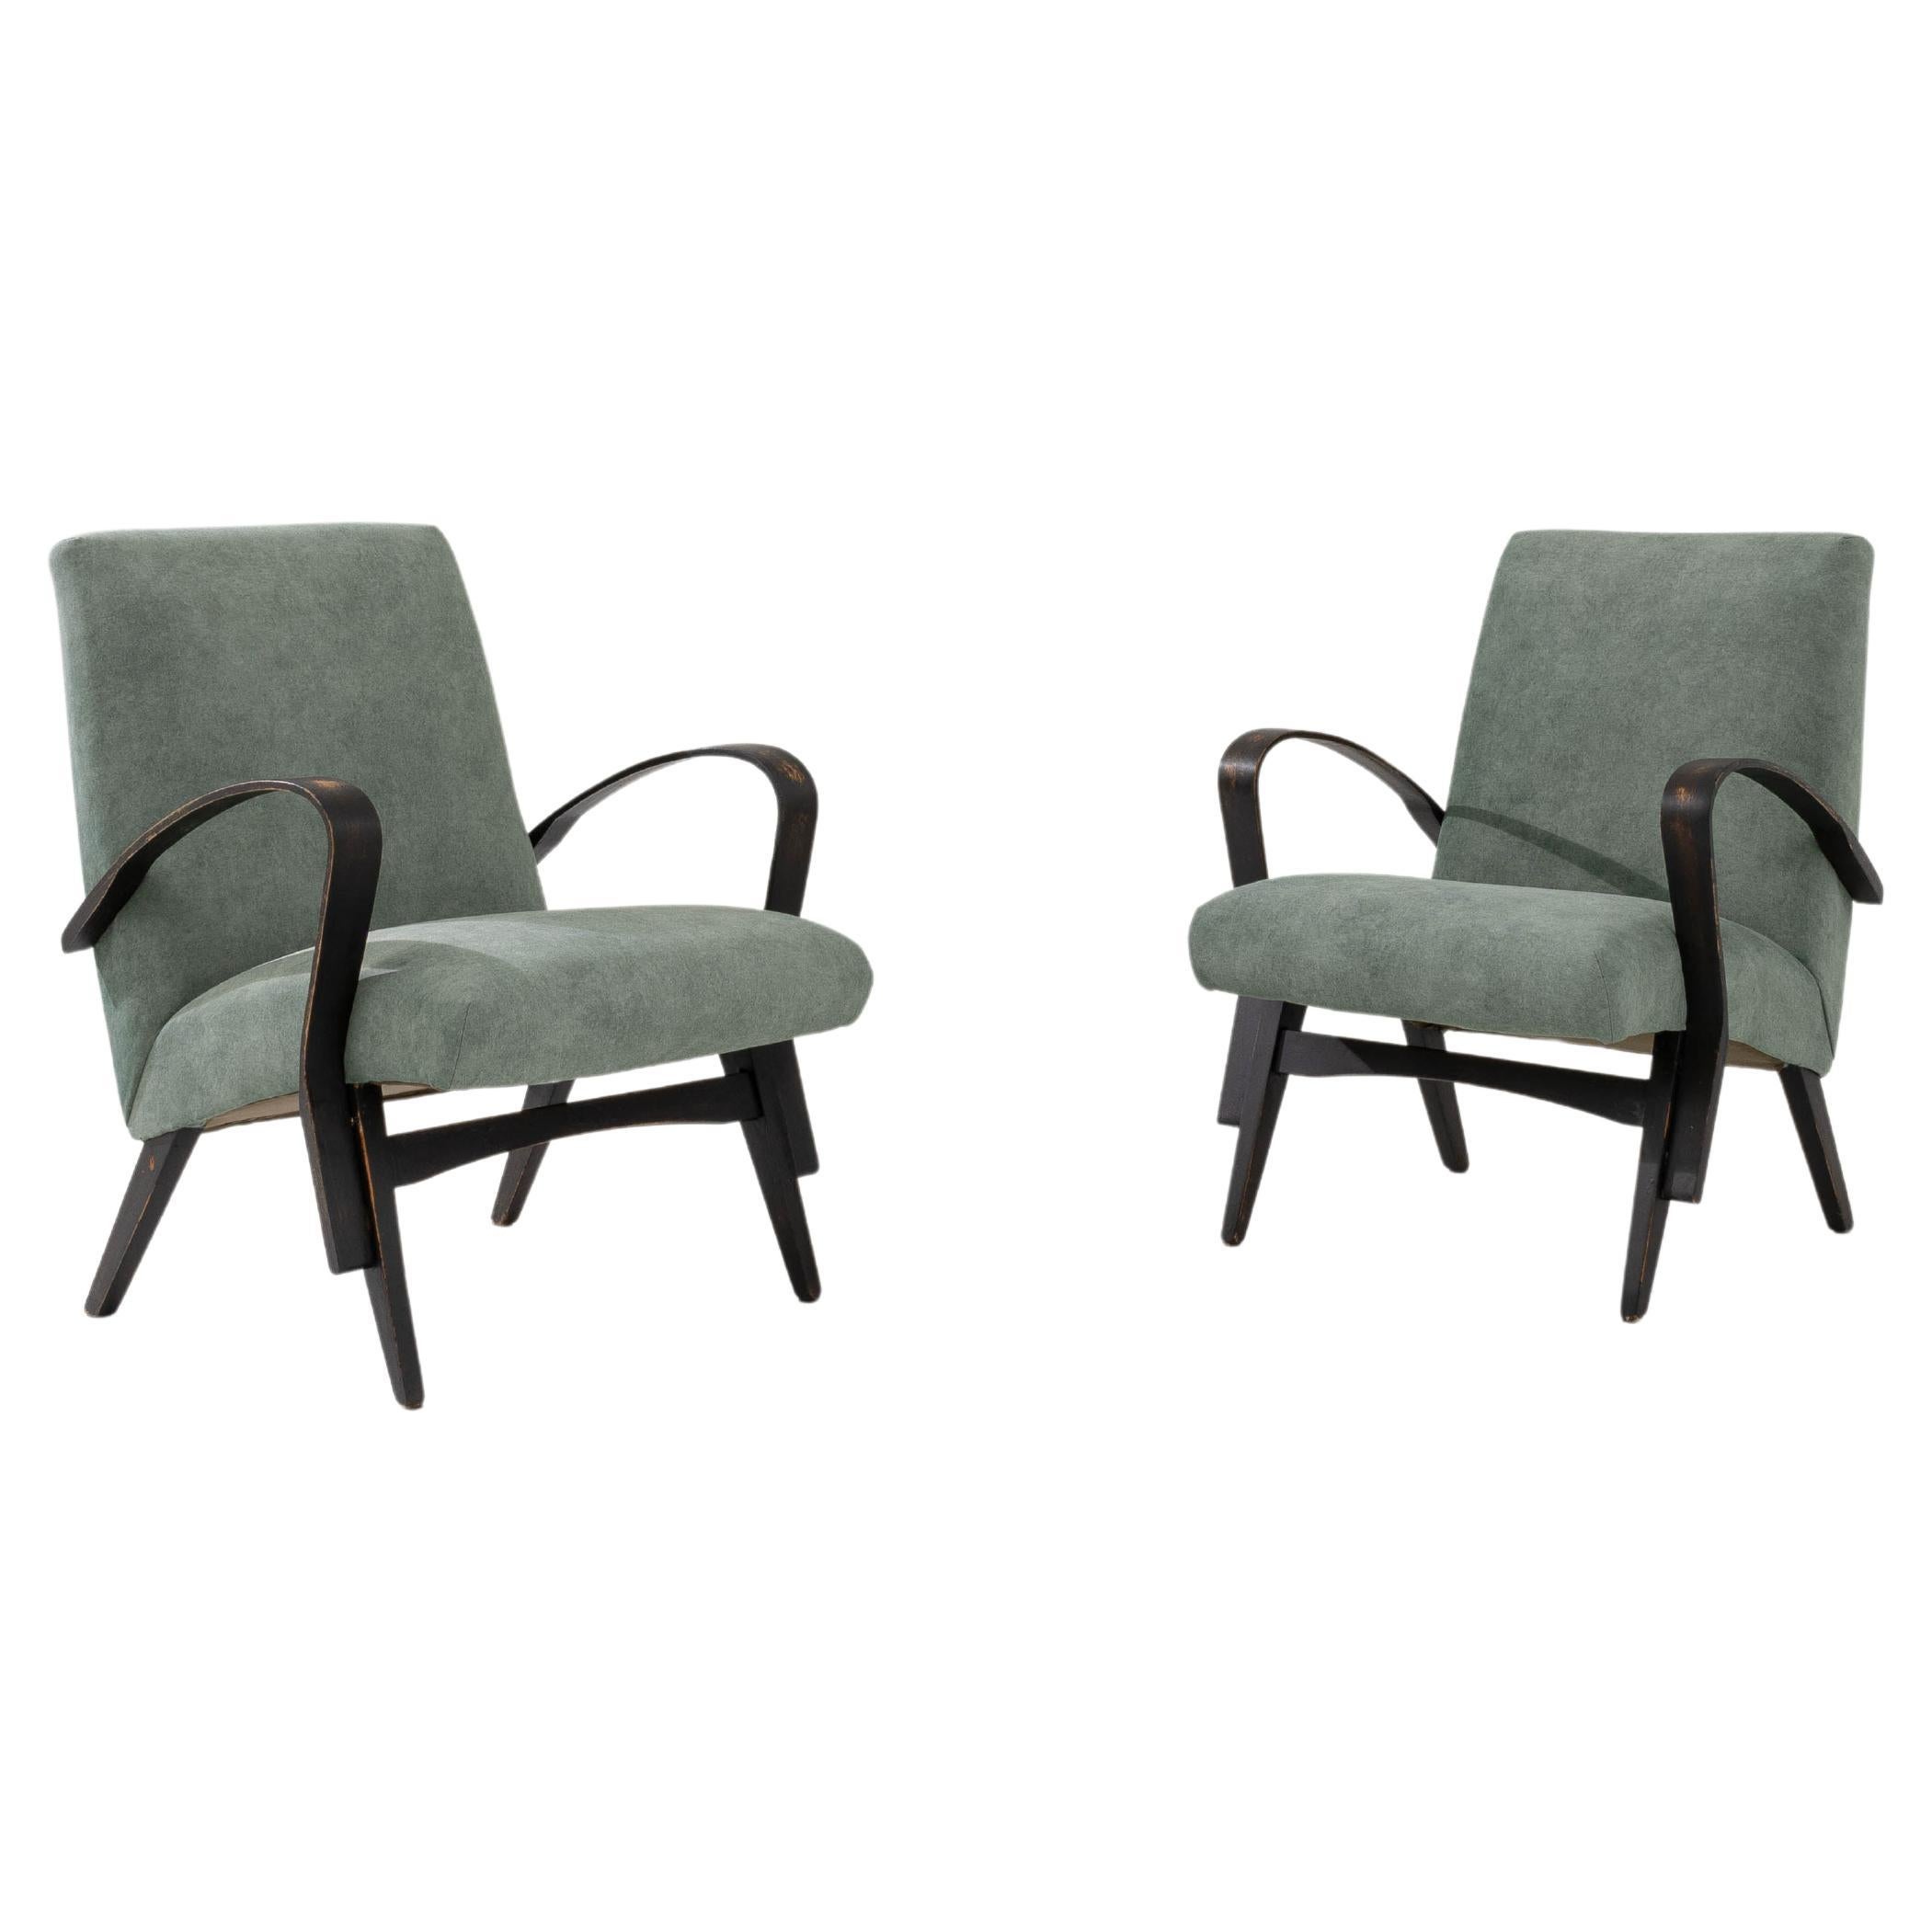 1960s Czech Upholstered Armchairs By Tatra, a Pair For Sale